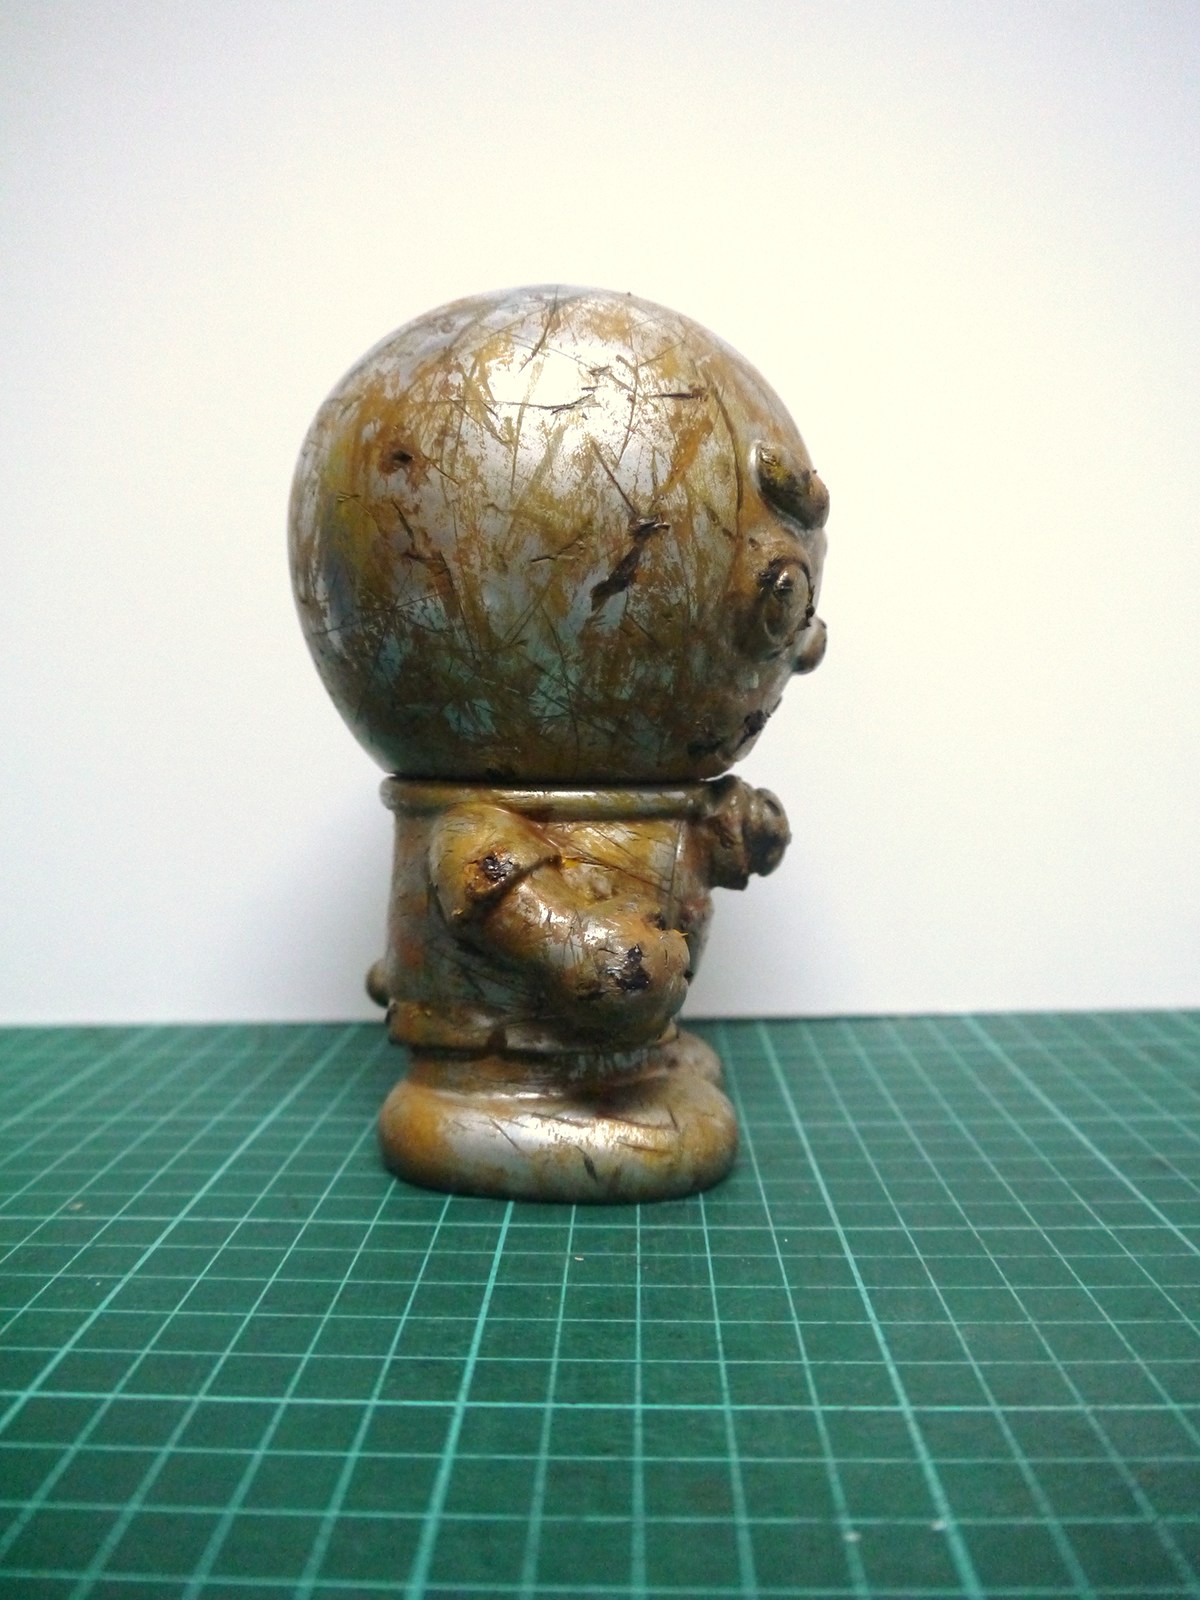 Doraemon toy customization ahboy rusted